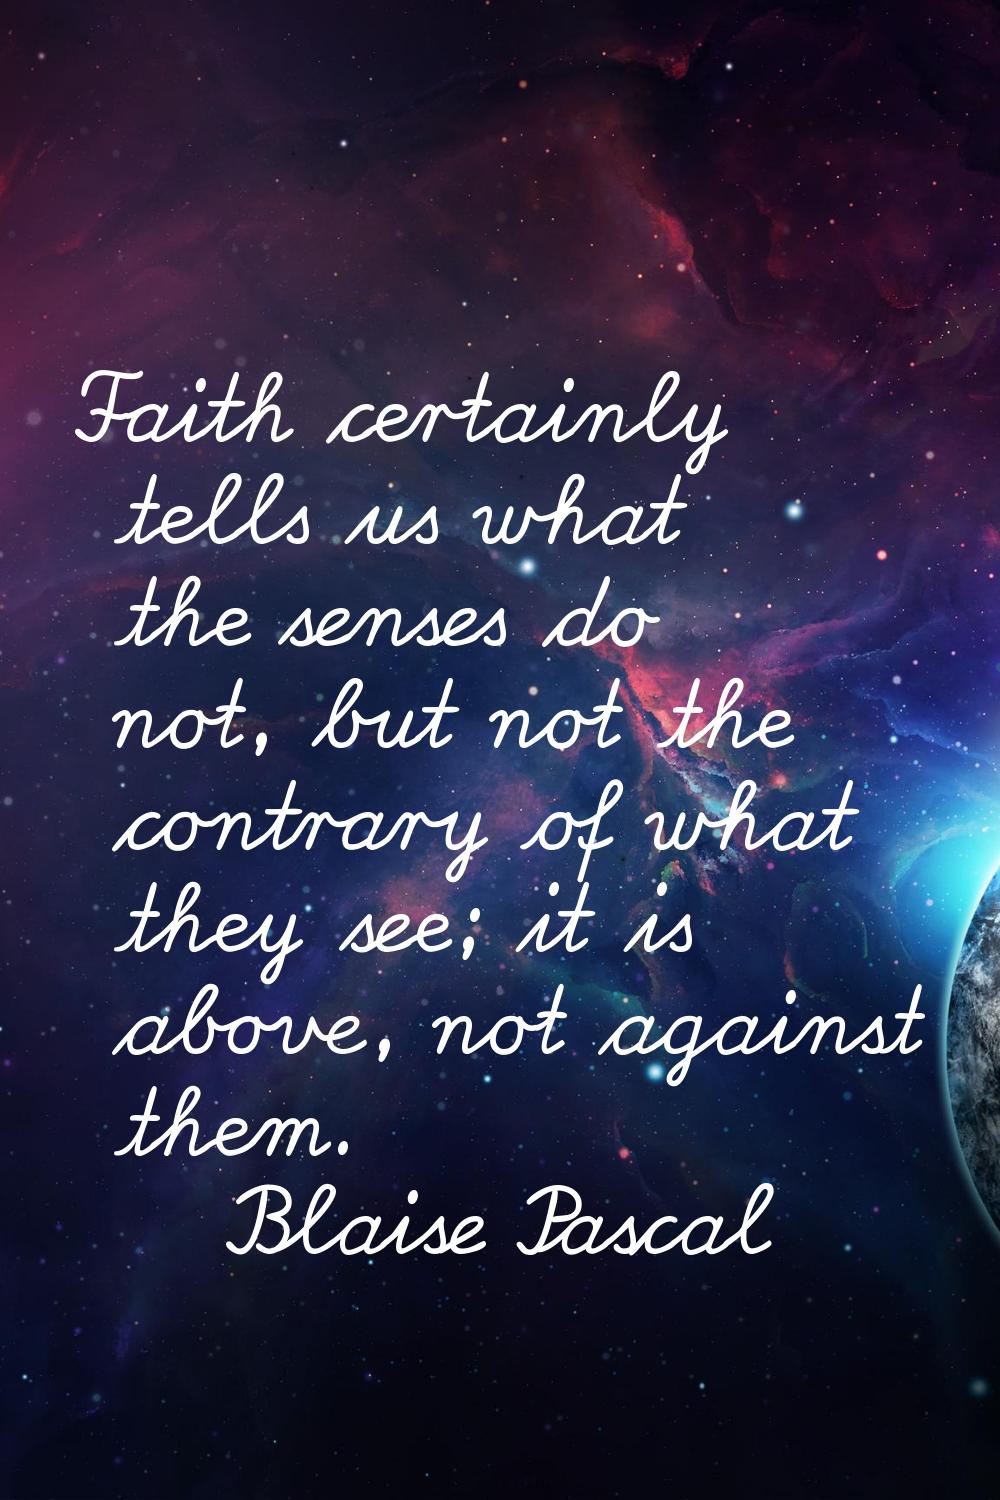 Faith certainly tells us what the senses do not, but not the contrary of what they see; it is above